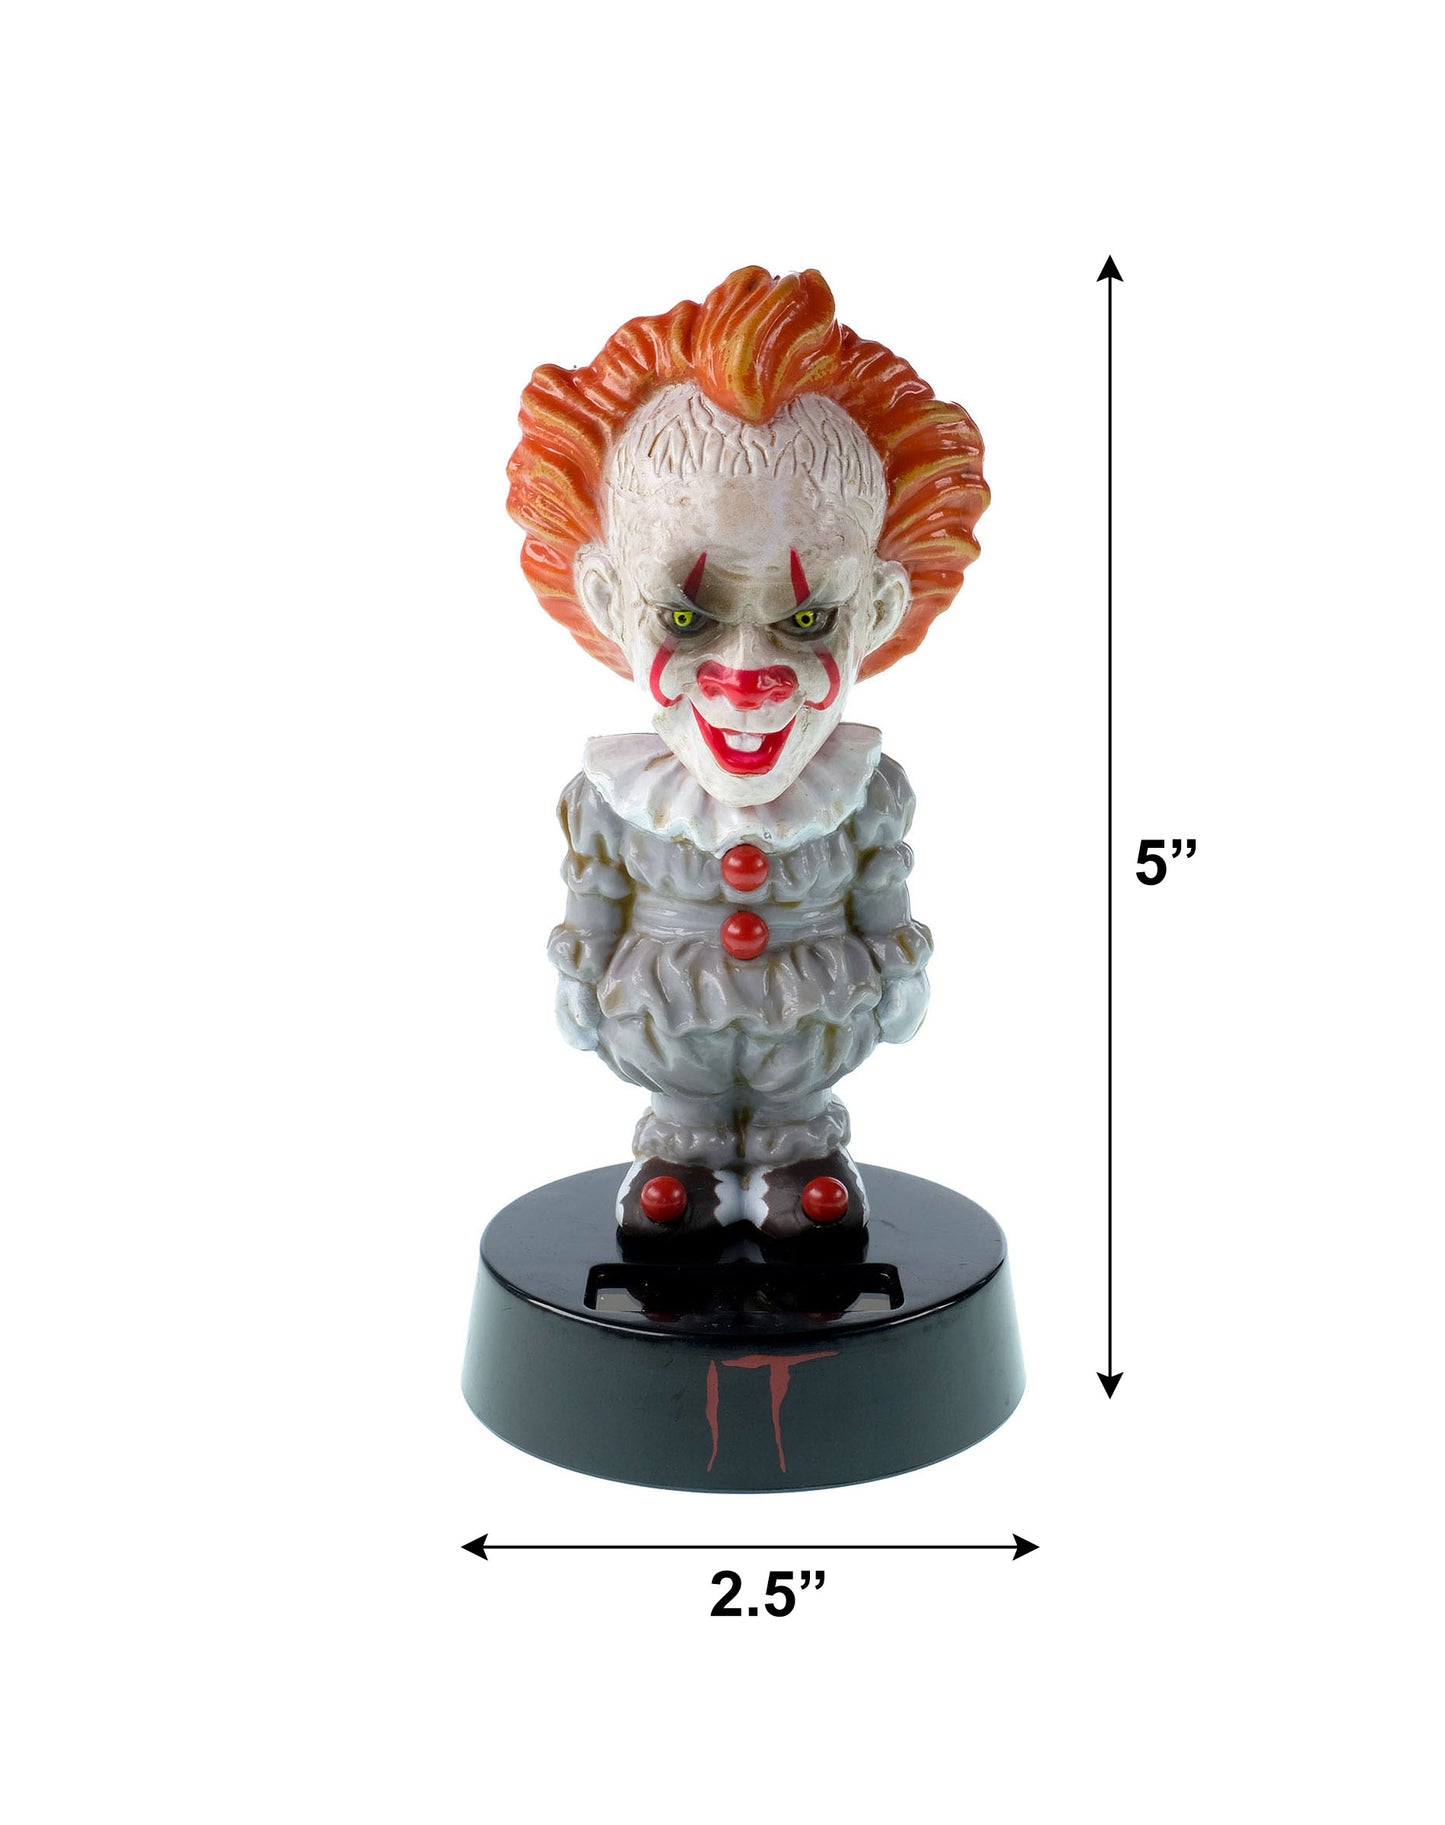 
                  
                    It: Pennywise the Dancing Clown Solar Bobblehead
                  
                